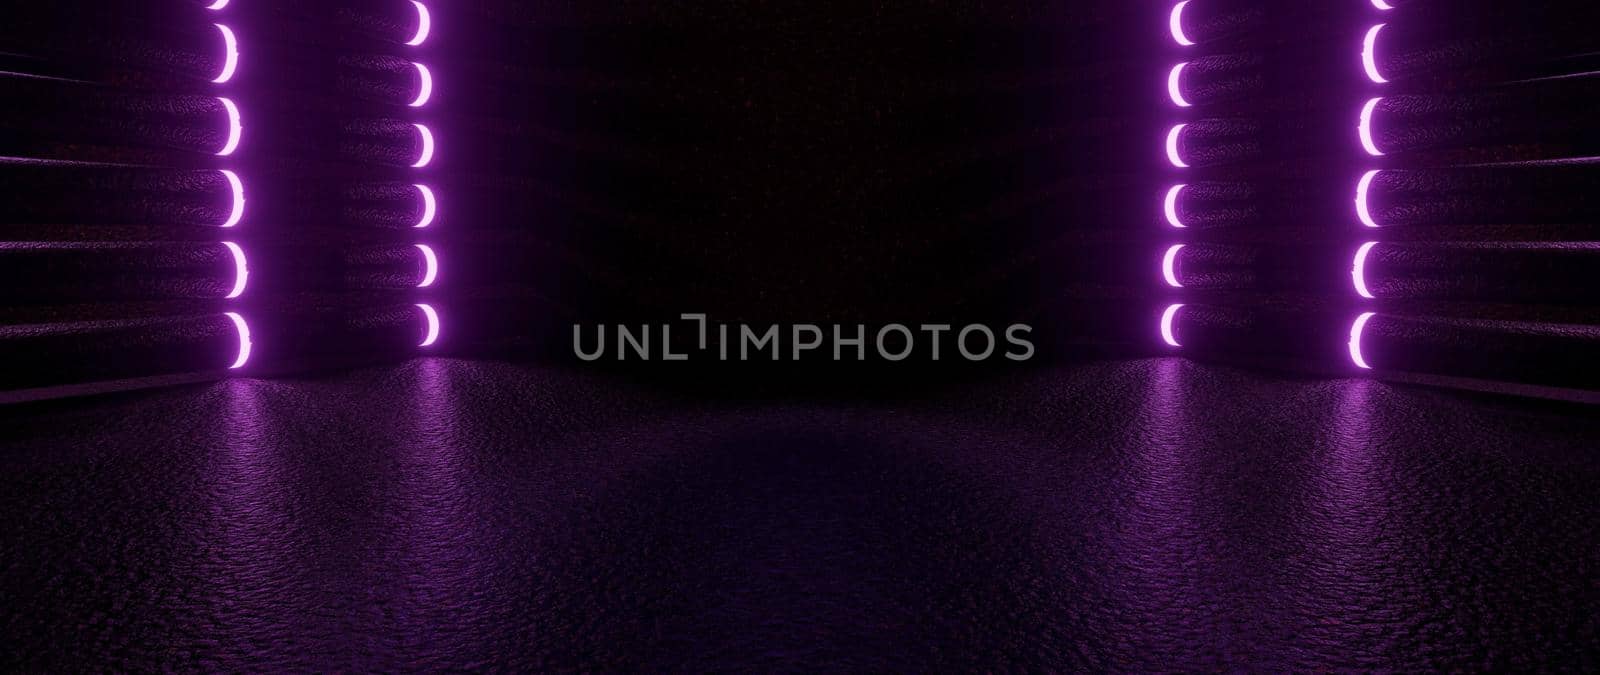 Unknown Garage Club Warehouse Parking Stage Basement Spotlight Bright Purple Illustrative Banner Background Wallpaper For Graphic Design 3D Illustration by yay_lmrb